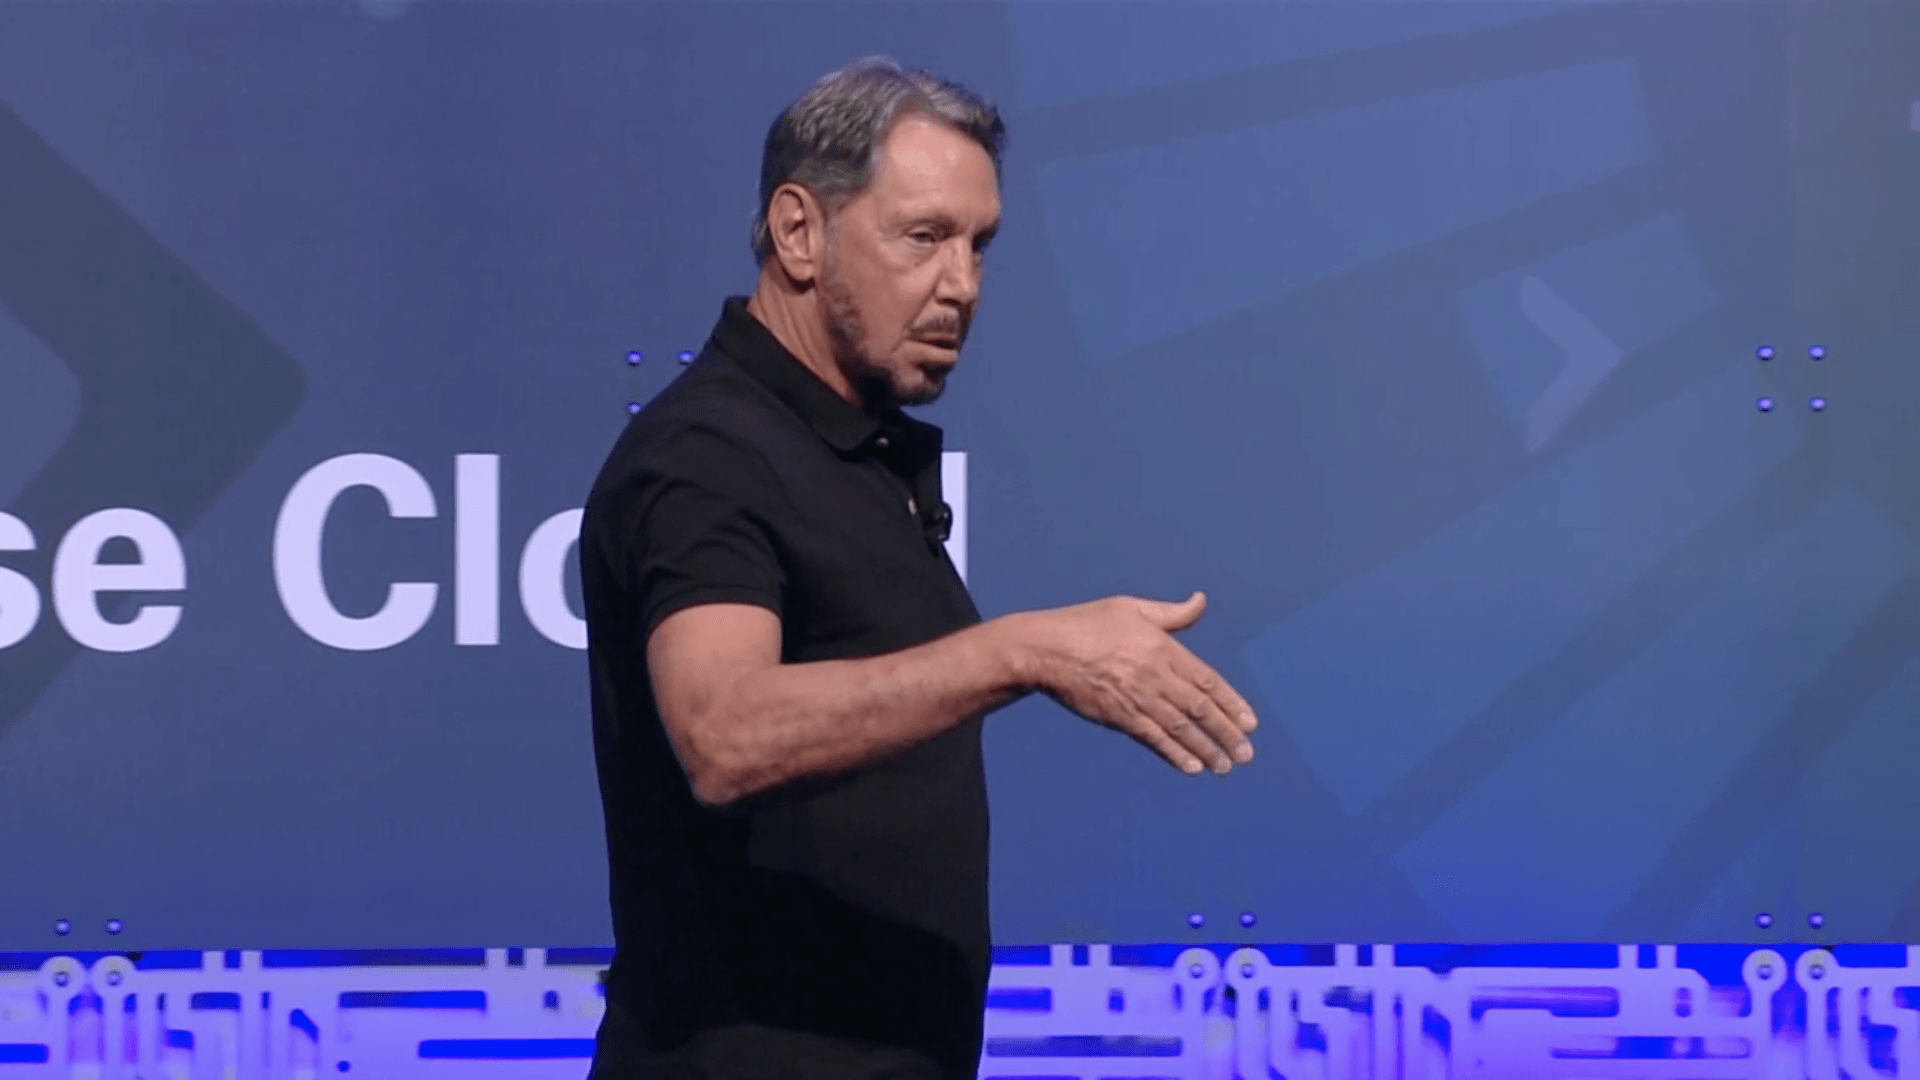 Oracle's Larry Ellison says it will be hard for Amazon to use own tech